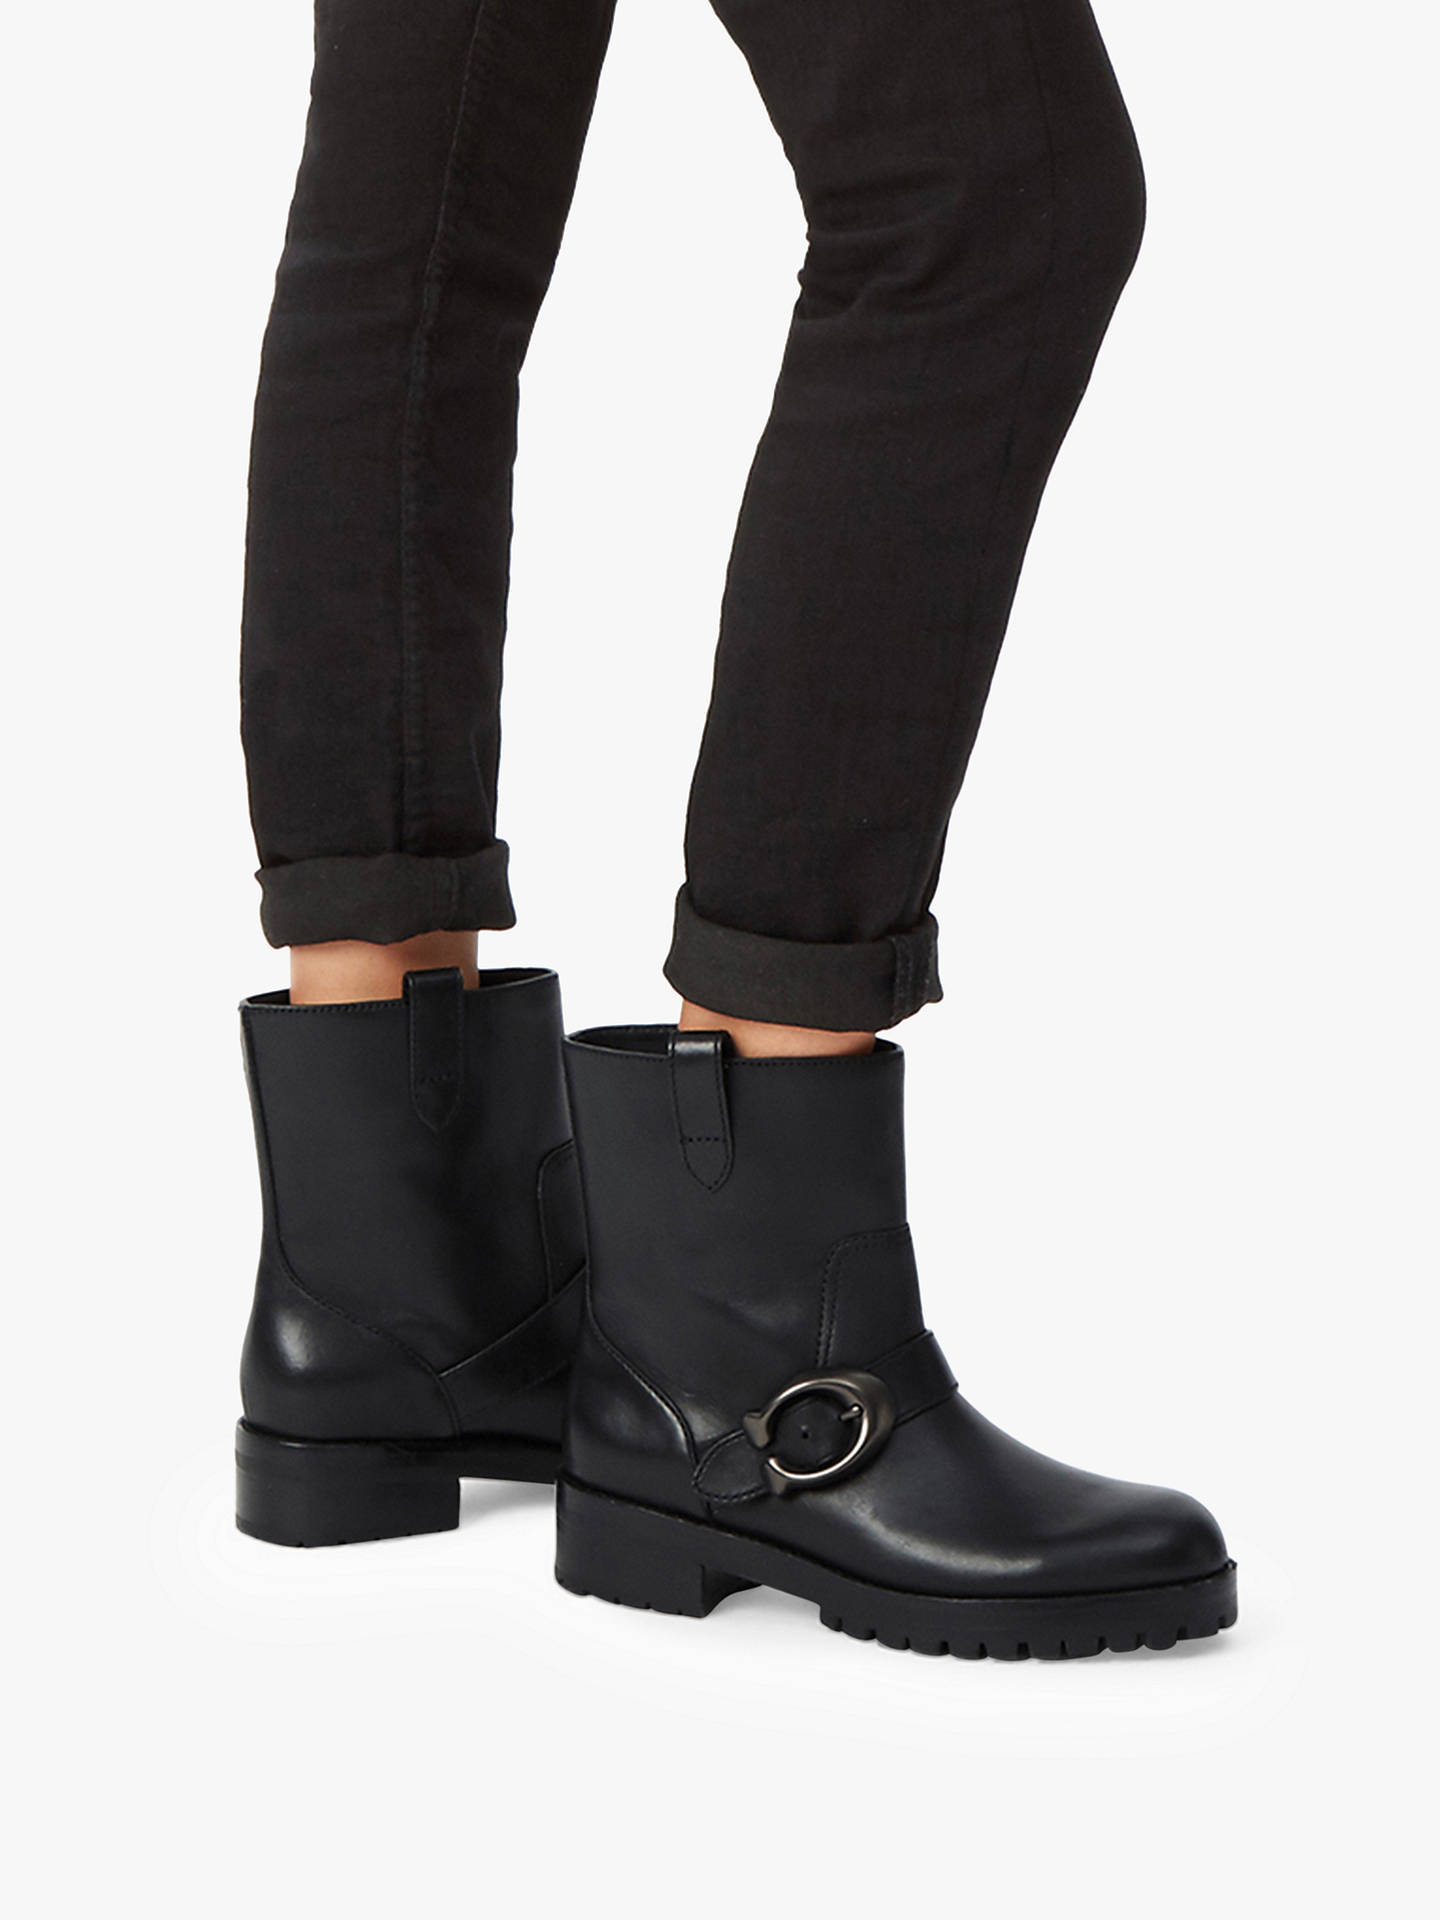 Coach Leighton C Buckle Ankle Boots, Black Leather at John Lewis & Partners